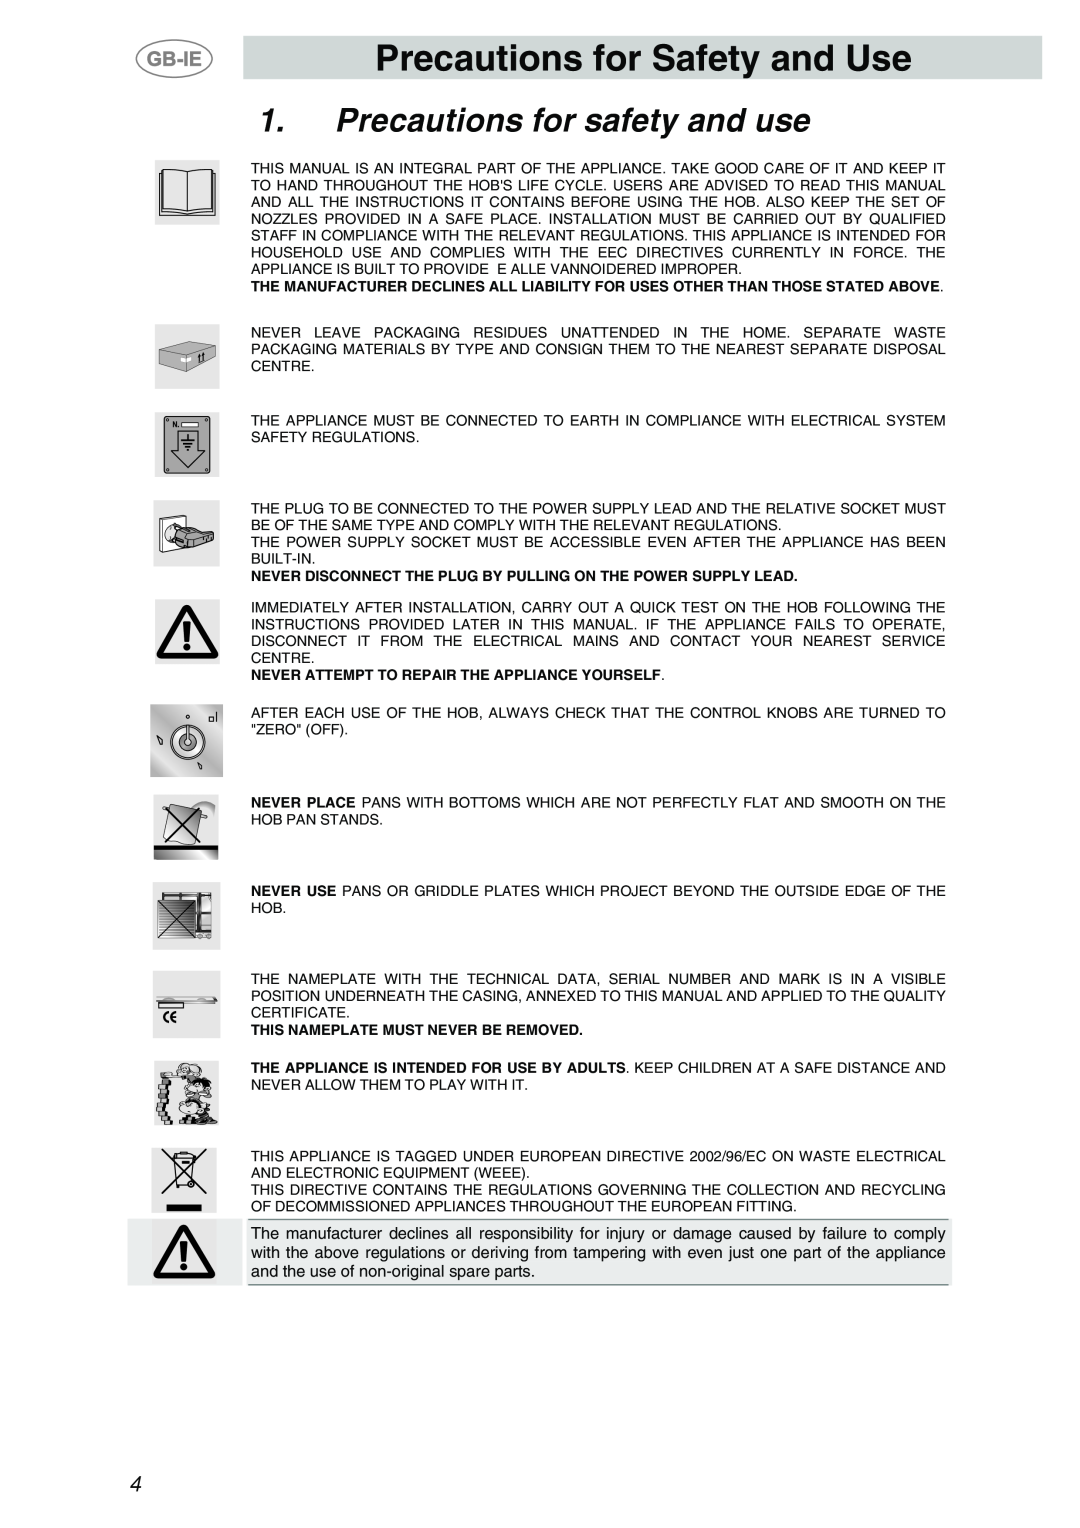 Smeg PTS723-3 manual Precautions for Safety and Use, Precautions for safety and use, This Nameplate Must Never Be Removed 